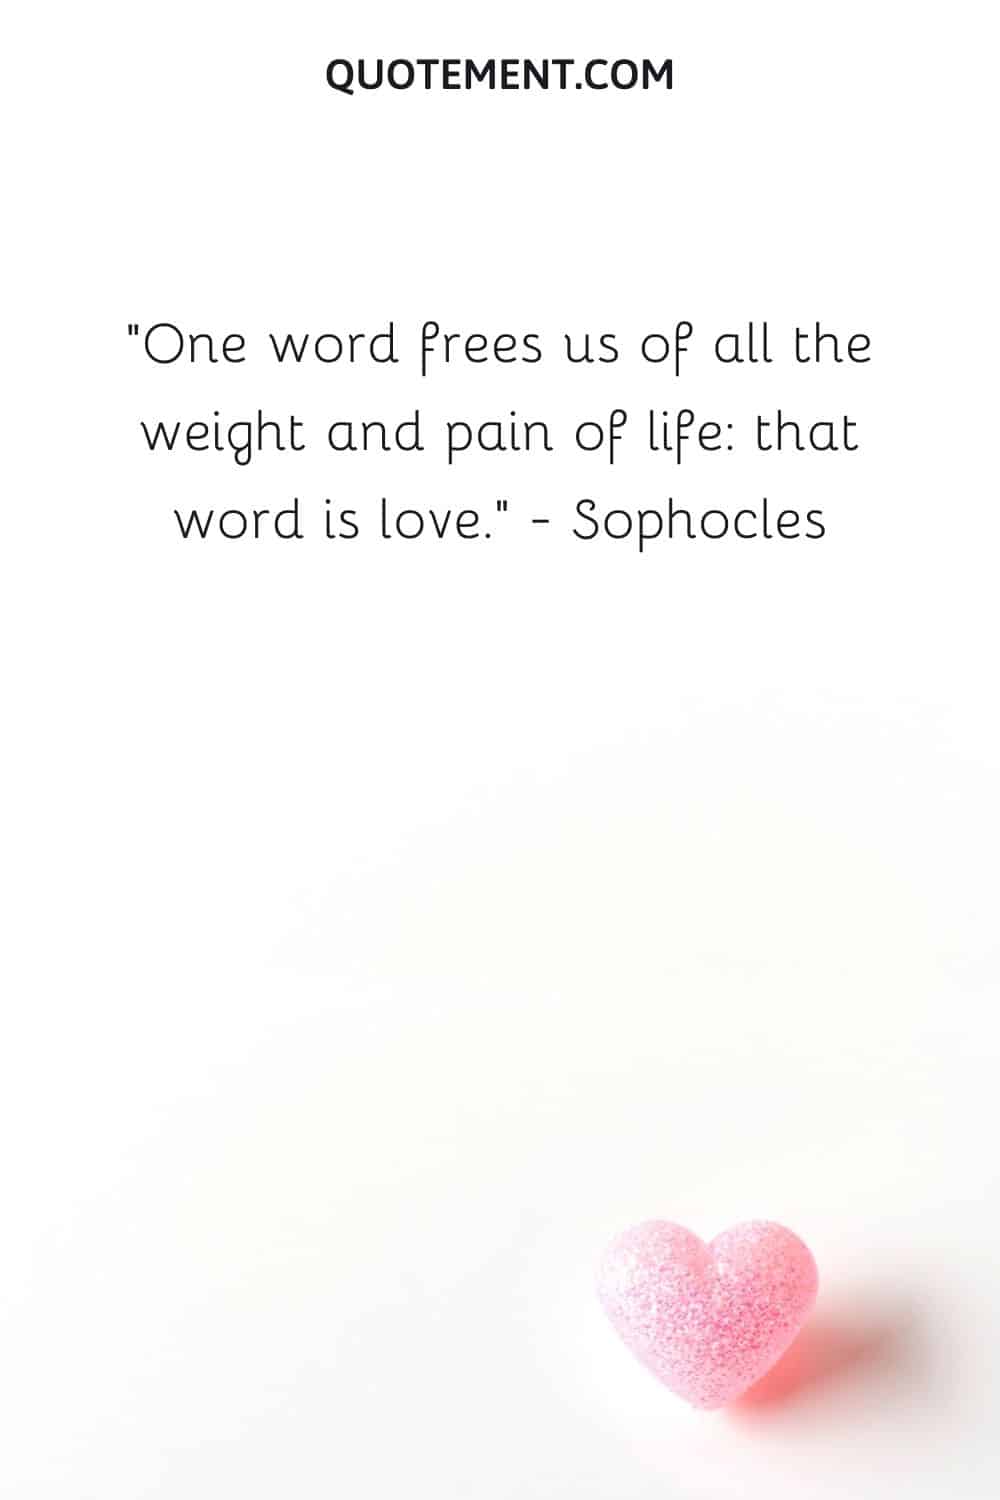 One word frees us of all the weight and pain in life.